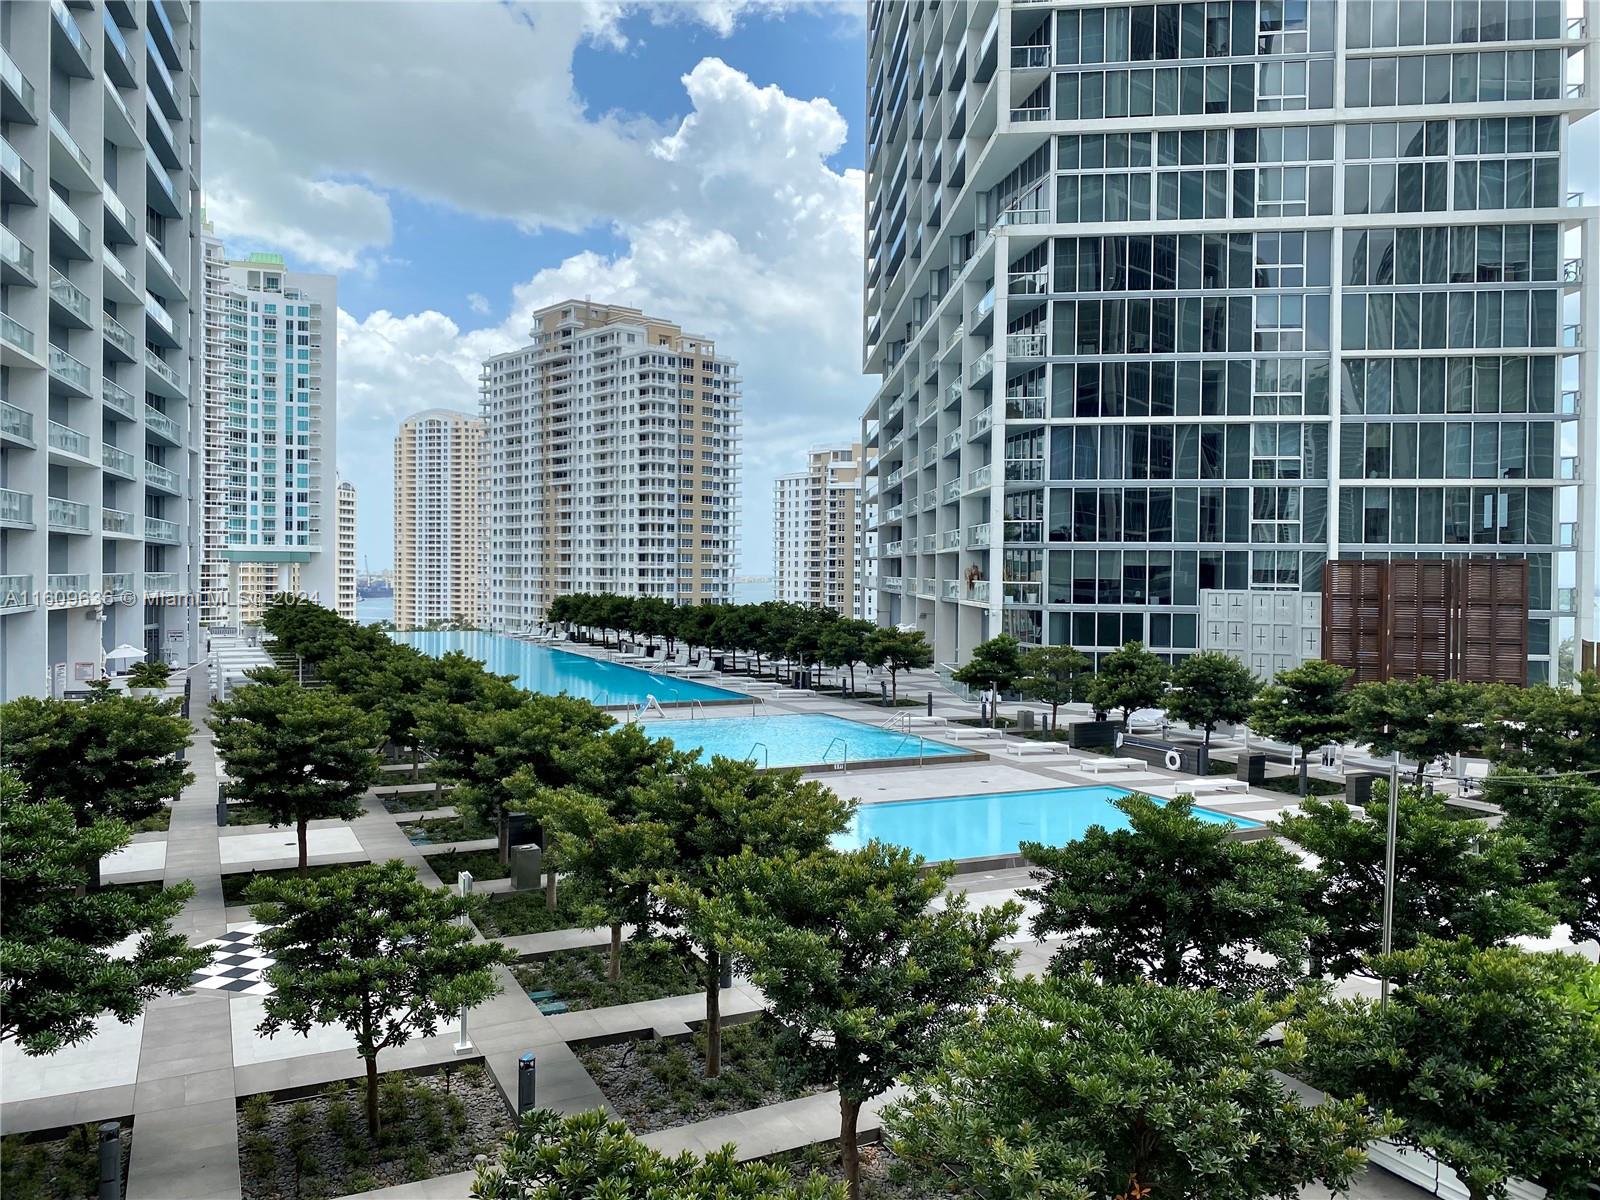 LOCATION LOCATION!!! ENJOY LIVING AT ICON BRICKELL!!!! 1BD/1BA FACING NORTH WITH SPECTACULAR WATER AND CITY VIEWS, 816 SQFT UNIT WITH TOP OF THE LINE APPLIANCES SUBZERO AND MIELE, GRANITE COUNTERTOPS, SPACIOUS LIVING AND DINING ROOM, PRIVATE BALCONY, WALK-IN CLOSET WITH GOOD SIZE BEDROOM, MARBLE BATHROOM , WASHER AND DRYER. ALL THE AMENITIES OF A LUXURY HIGH RISE. FOR MORE INFO PLEASE CONTACT LISTING AGENT.